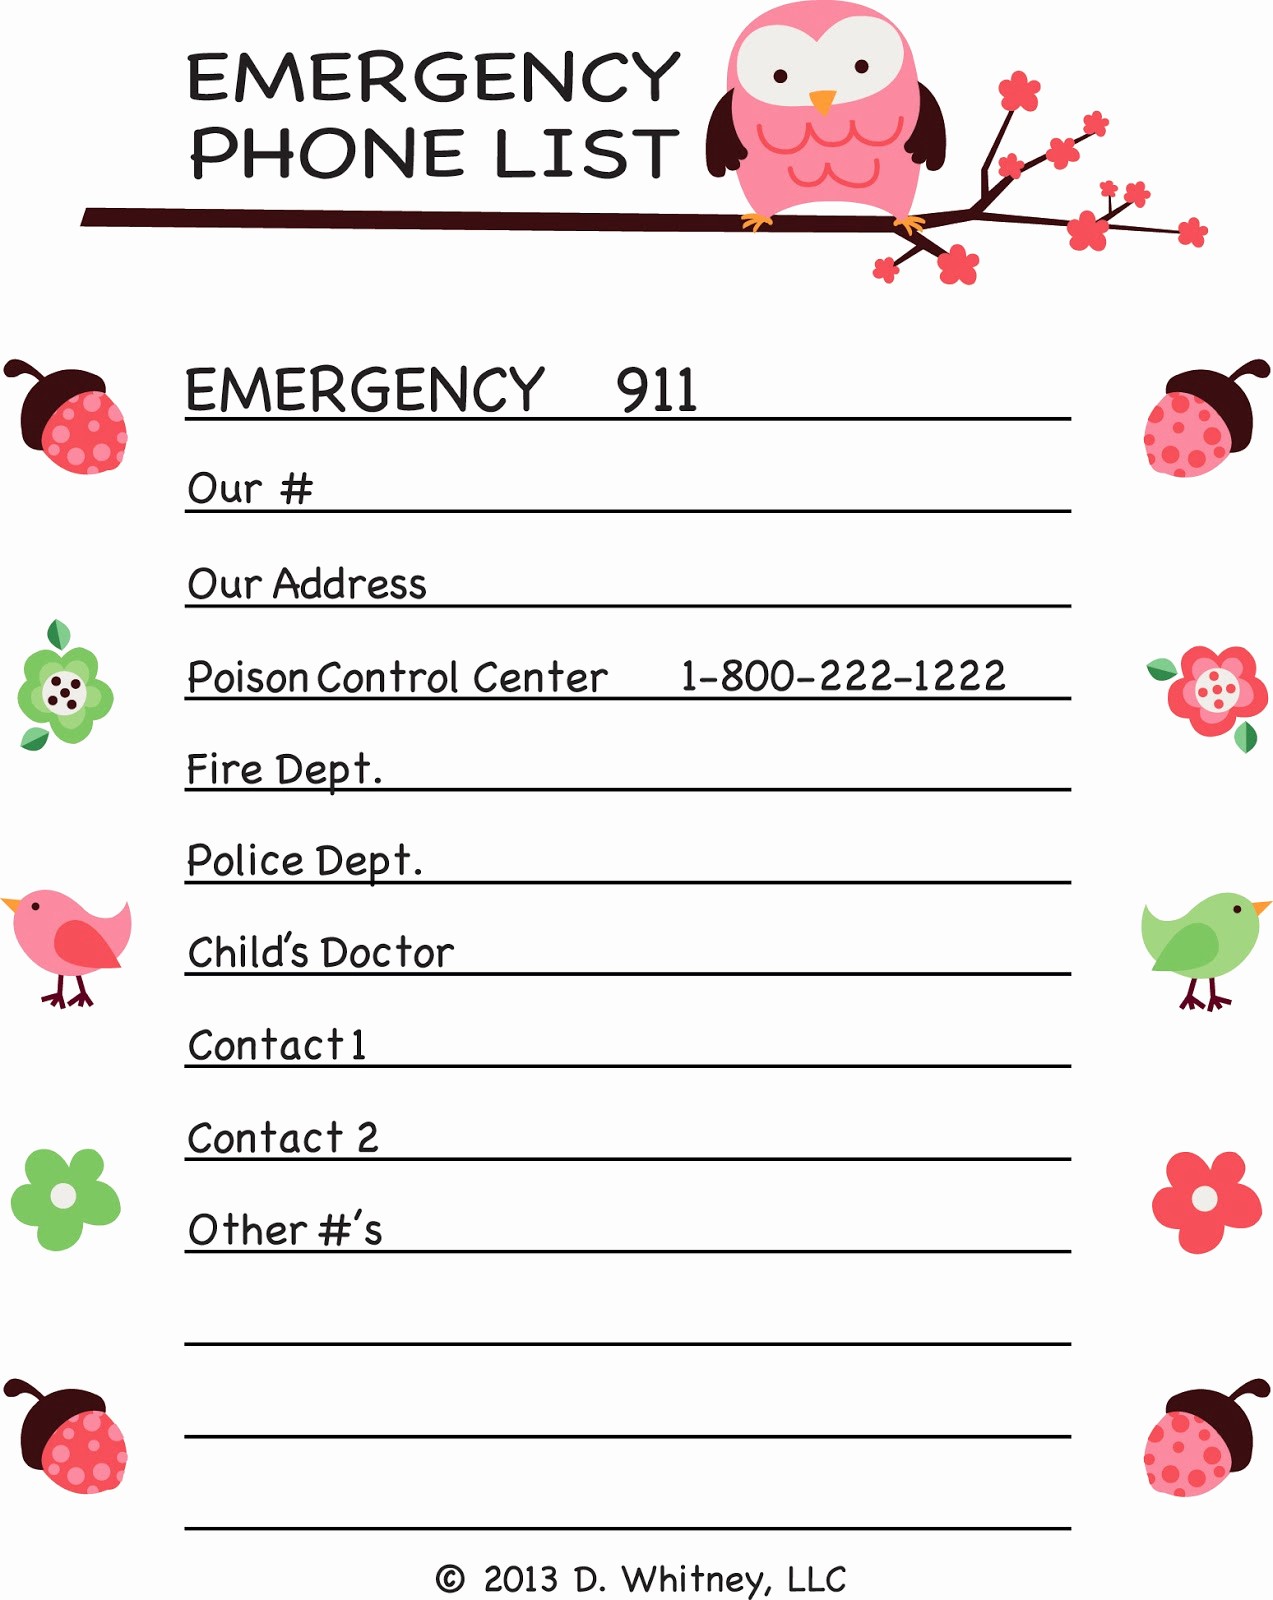 Emergency Contact List for Babysitter Fresh Parking Pal Emergency Phone List